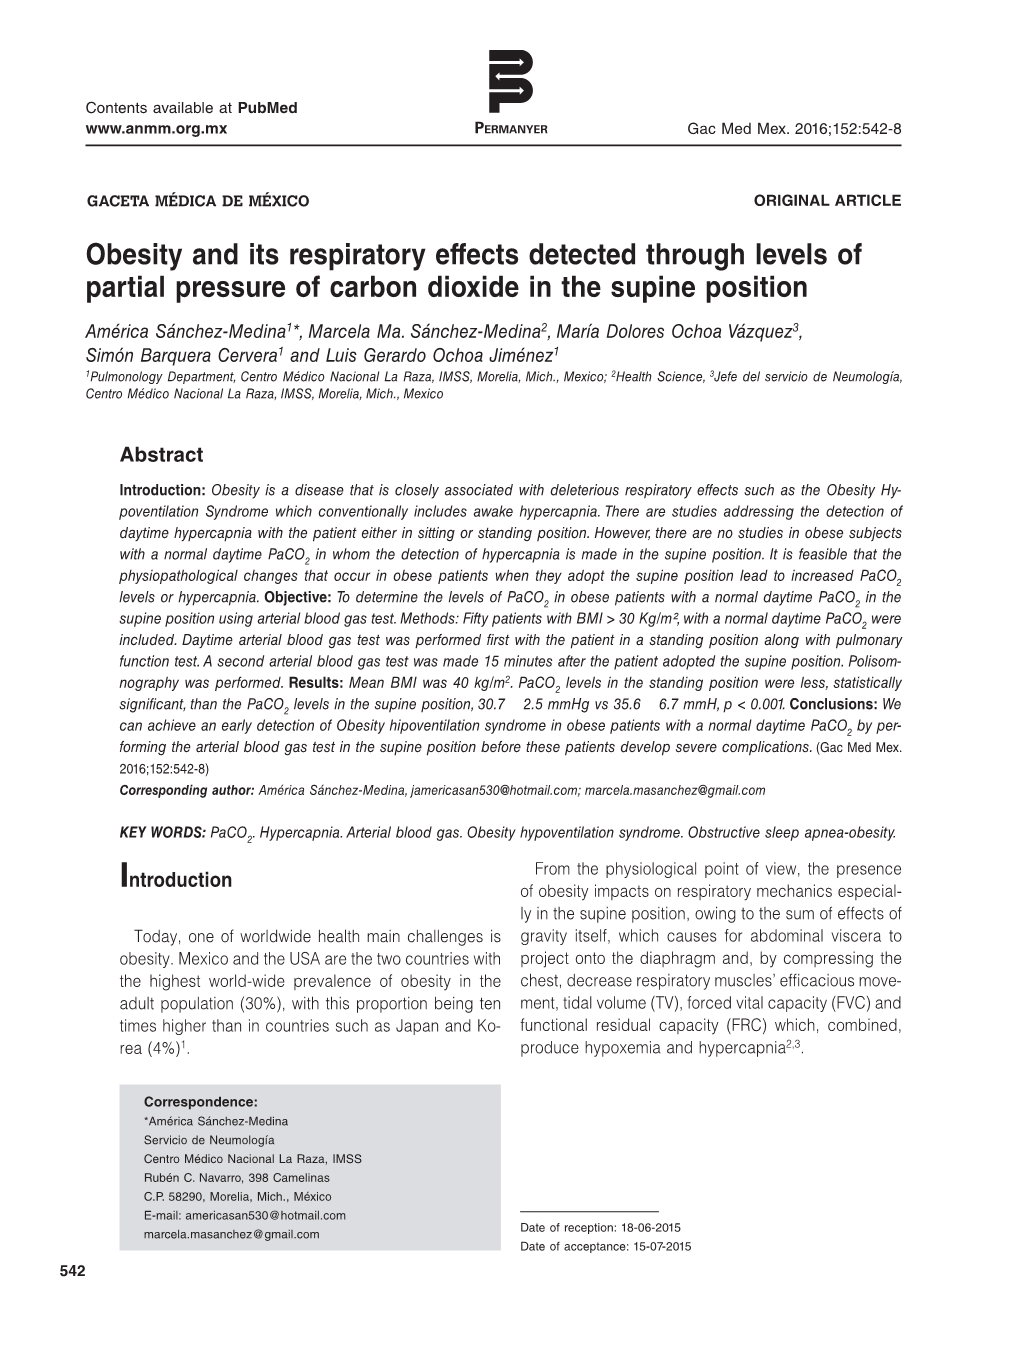 Obesity and Its Respiratory Effects Detected Through Levels of Partial Pressure of Carbon Dioxide in the Supine Position